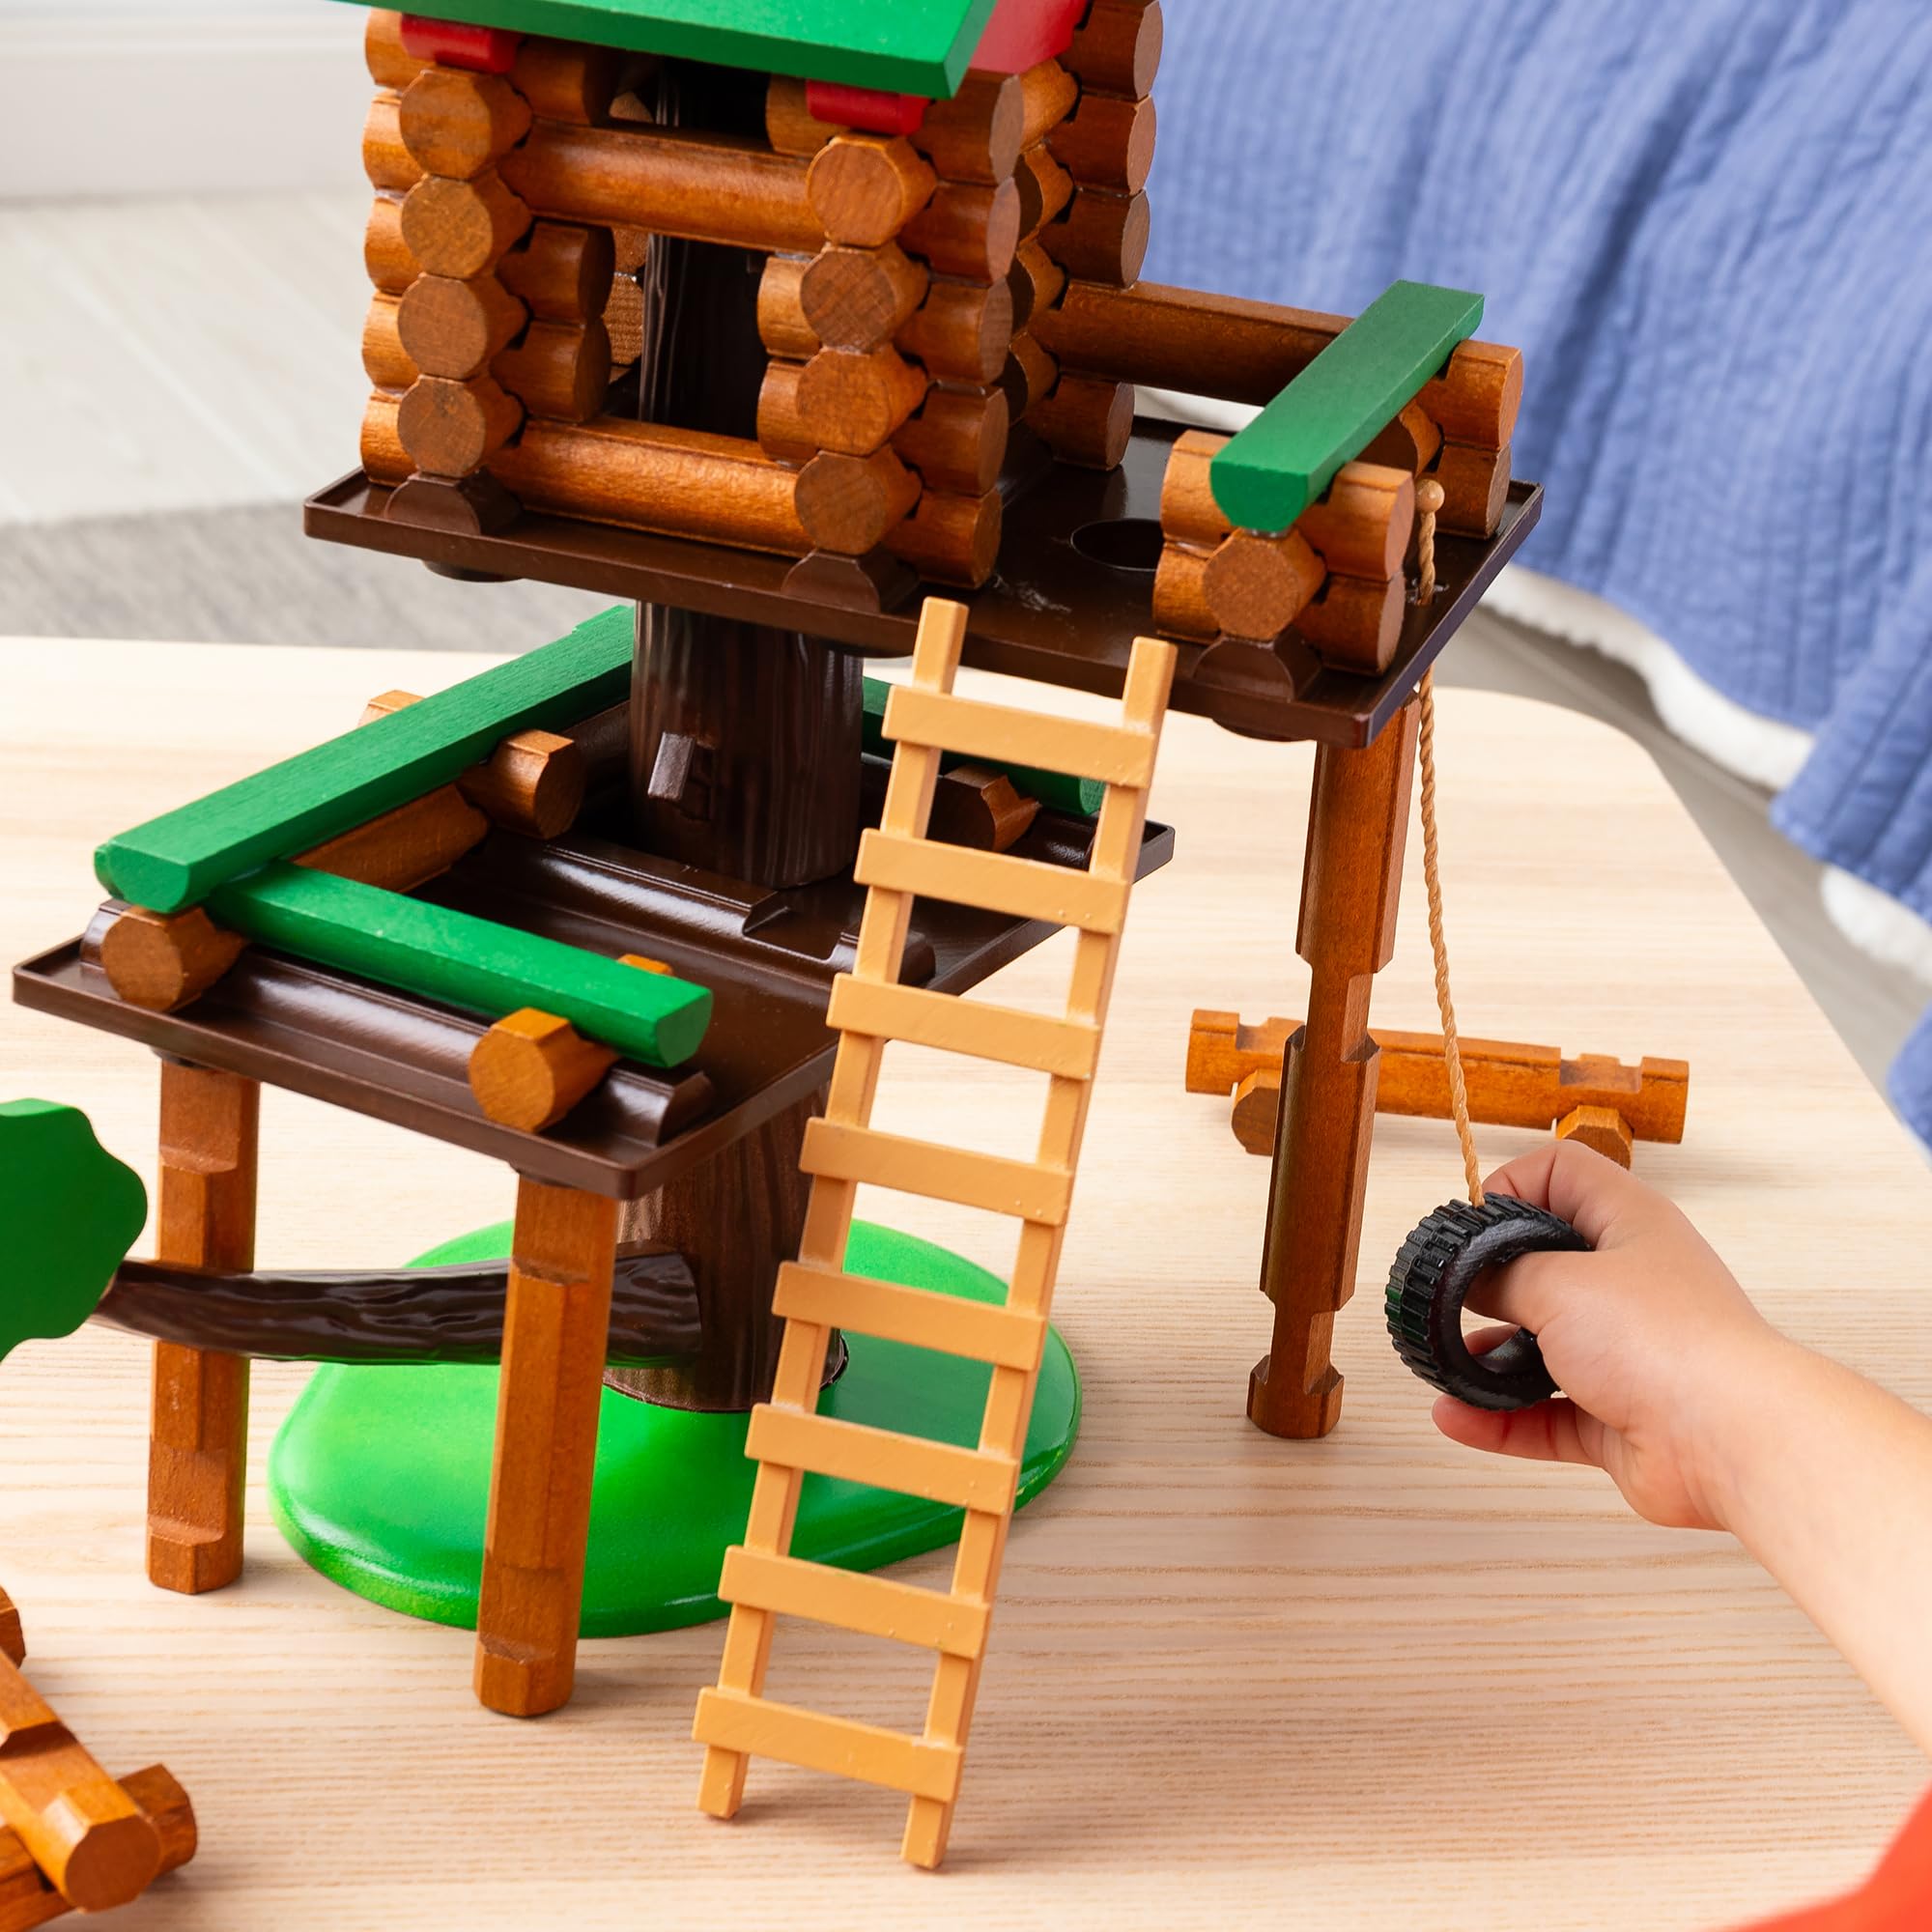 Lincoln Logs 2 Tiered Tree House Building Set, Educational Toy, Gift for Kids, Girls and Boys, STEM Retro Classic Toy